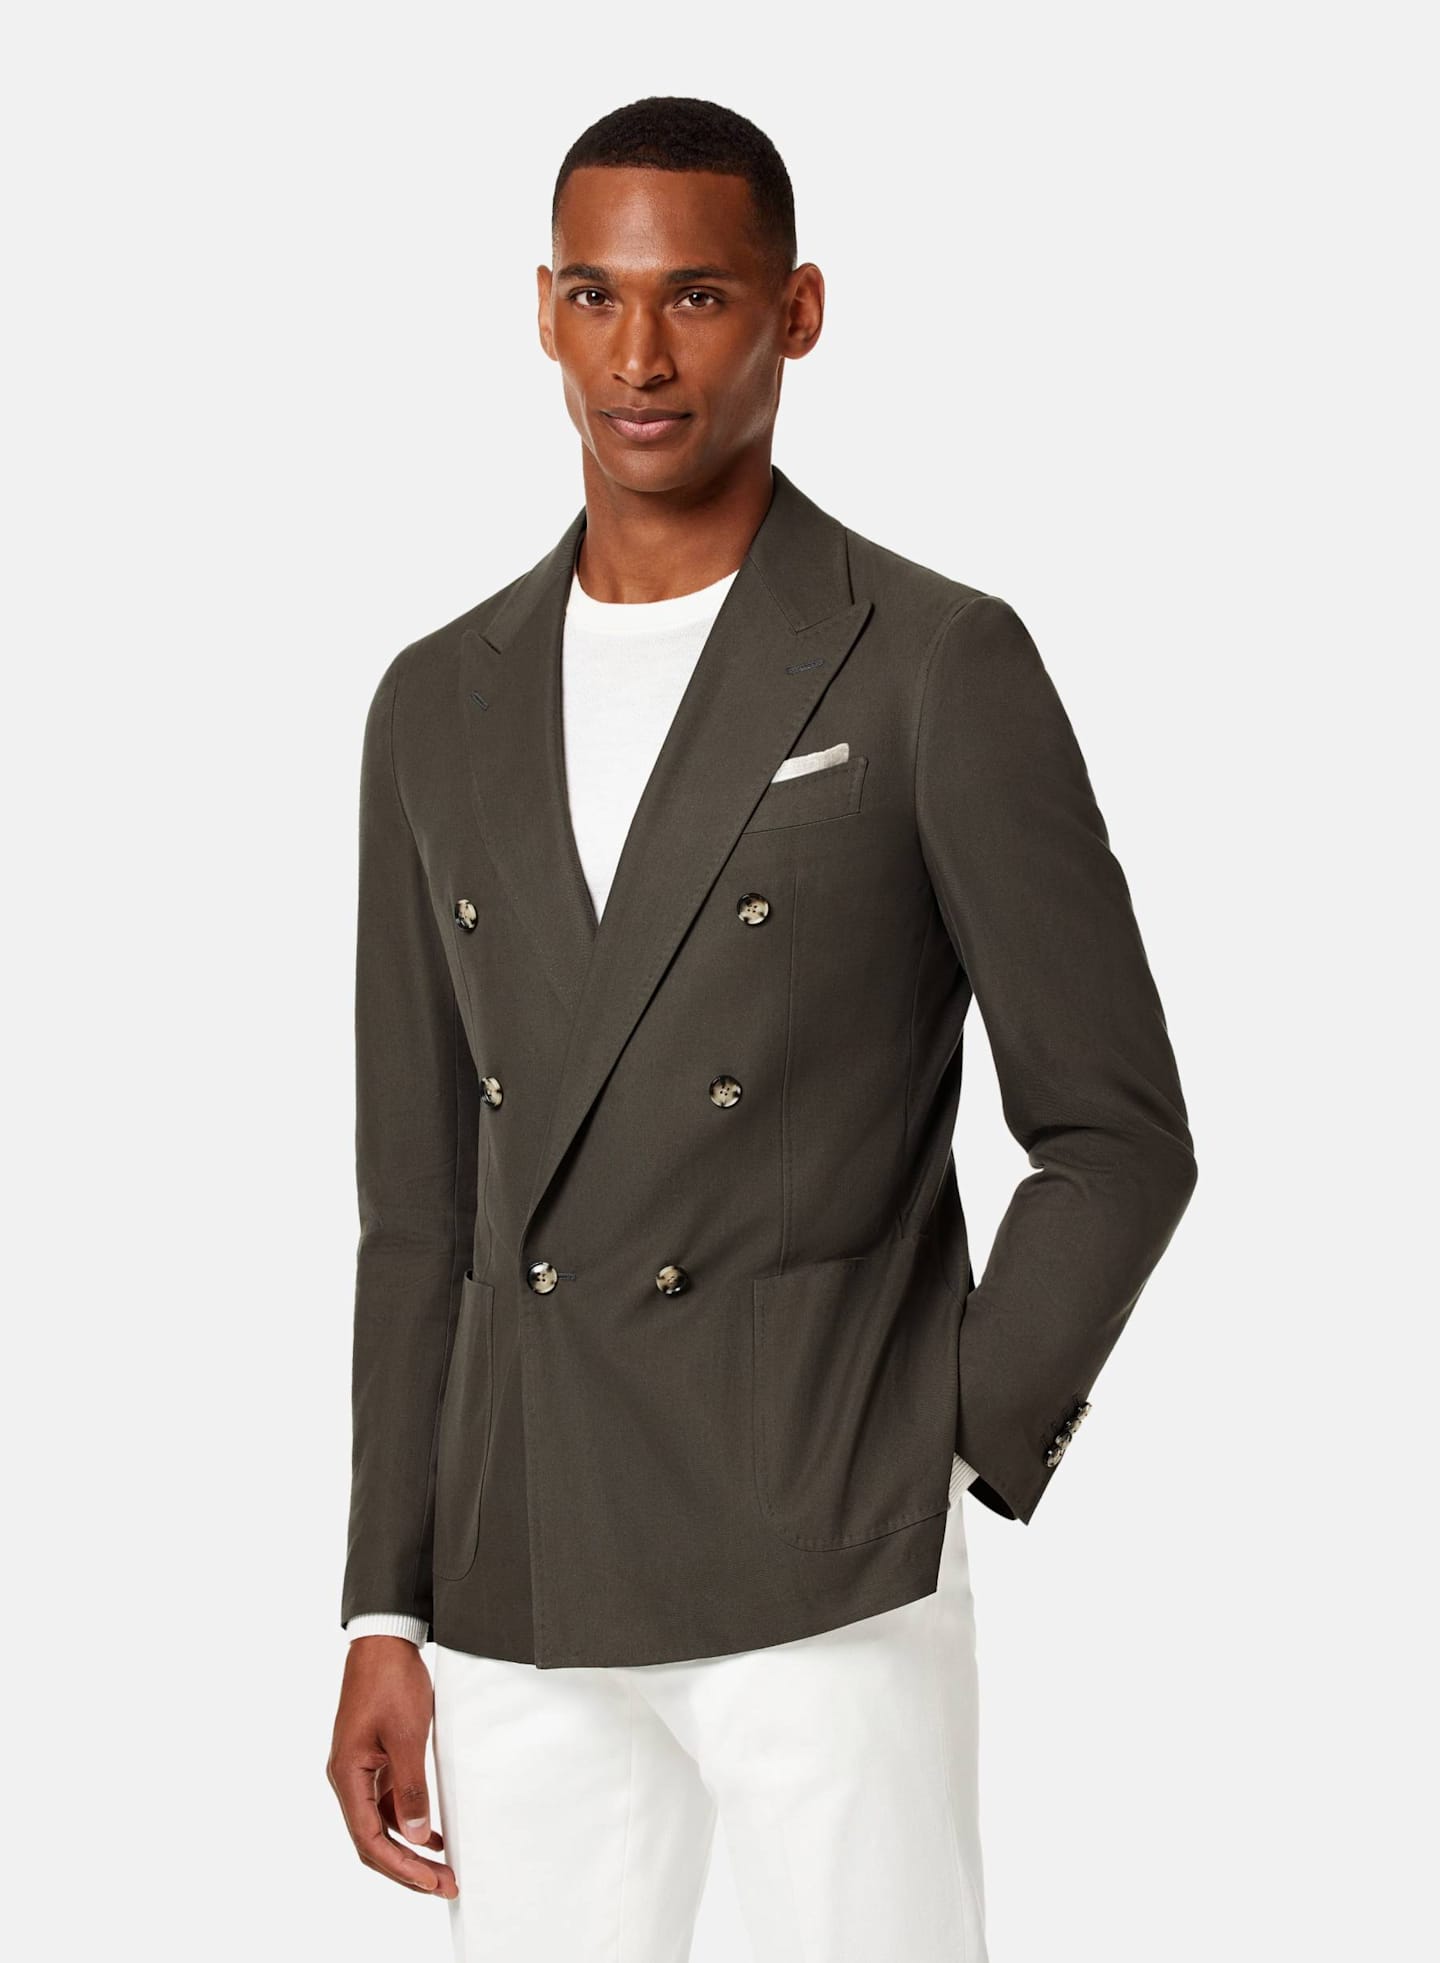 Man wearing a 6 on 2 low button closure double breasted jacket with a white handkerchief. 